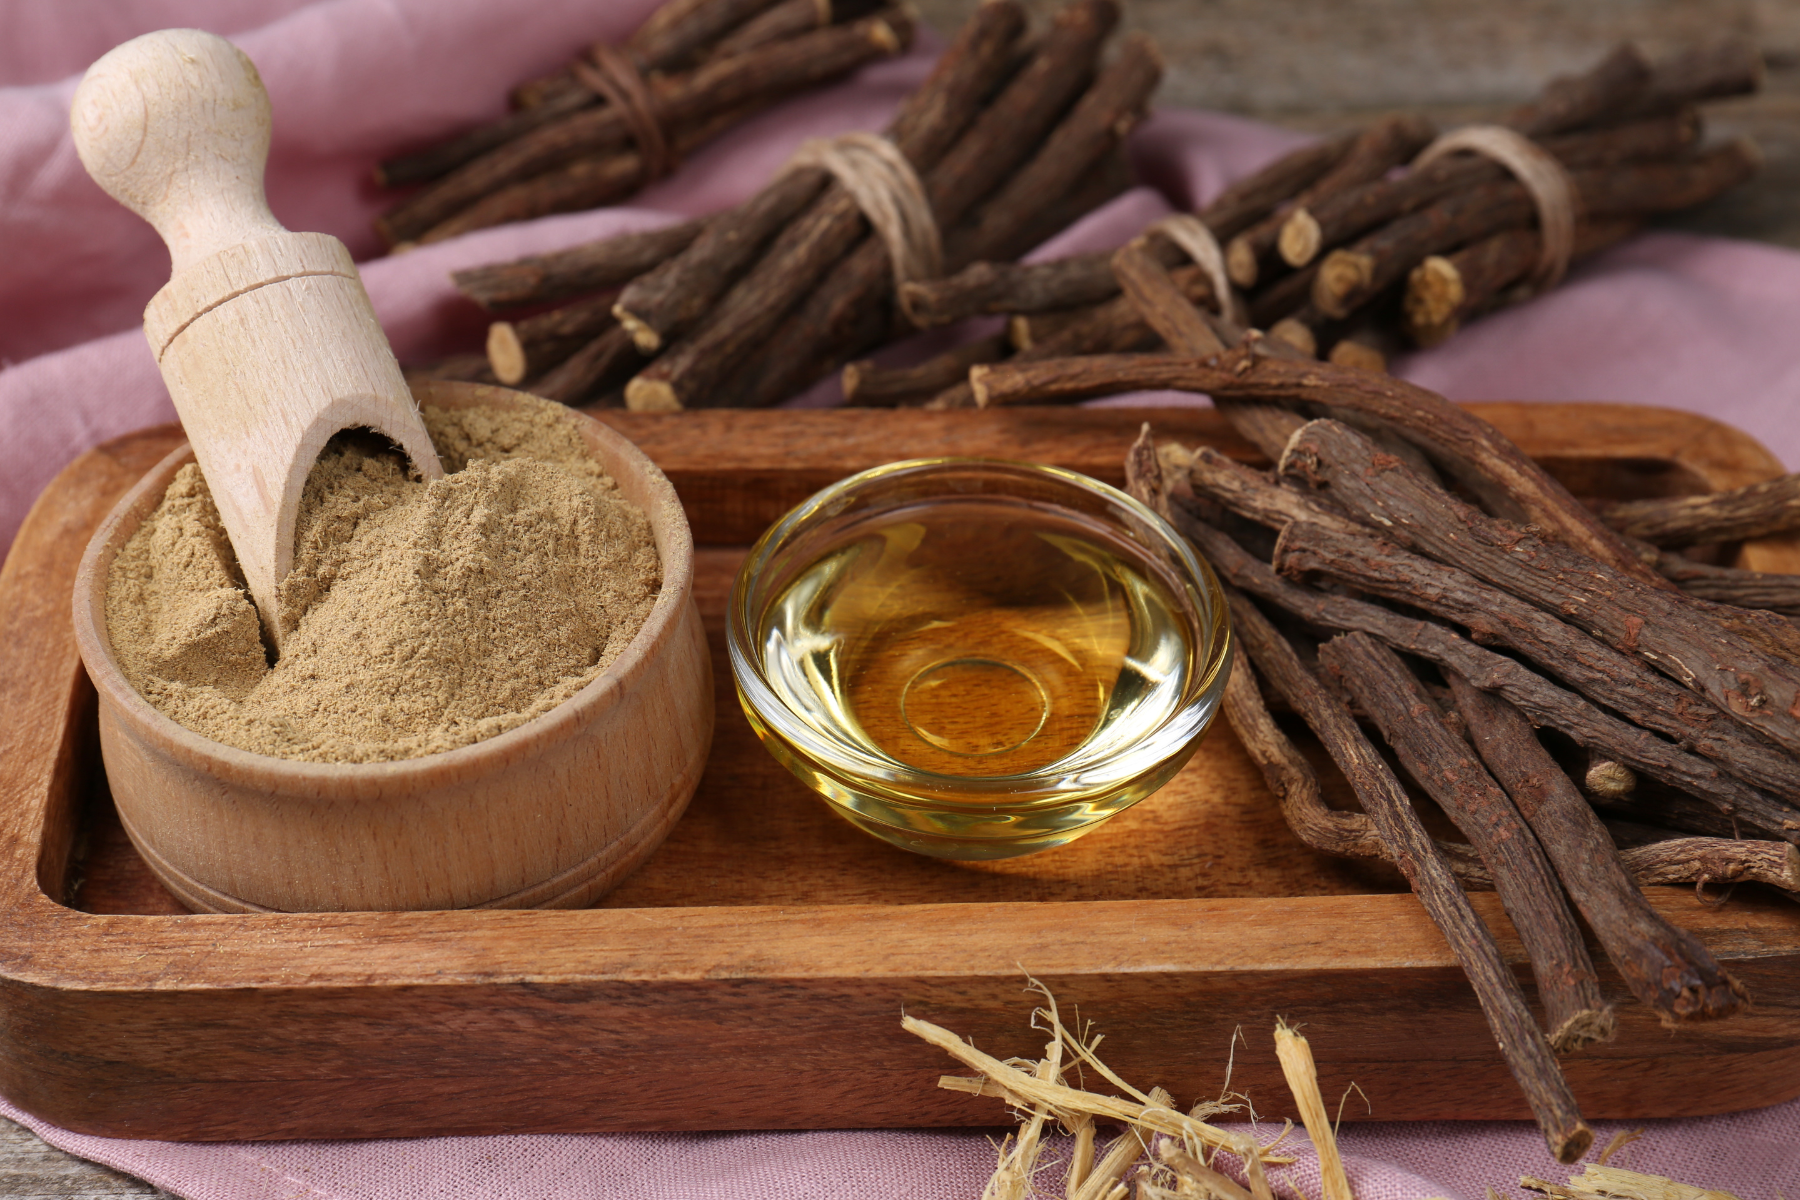 Burdock root, dandelion root, licorice root are all great liver cleansing herbs.